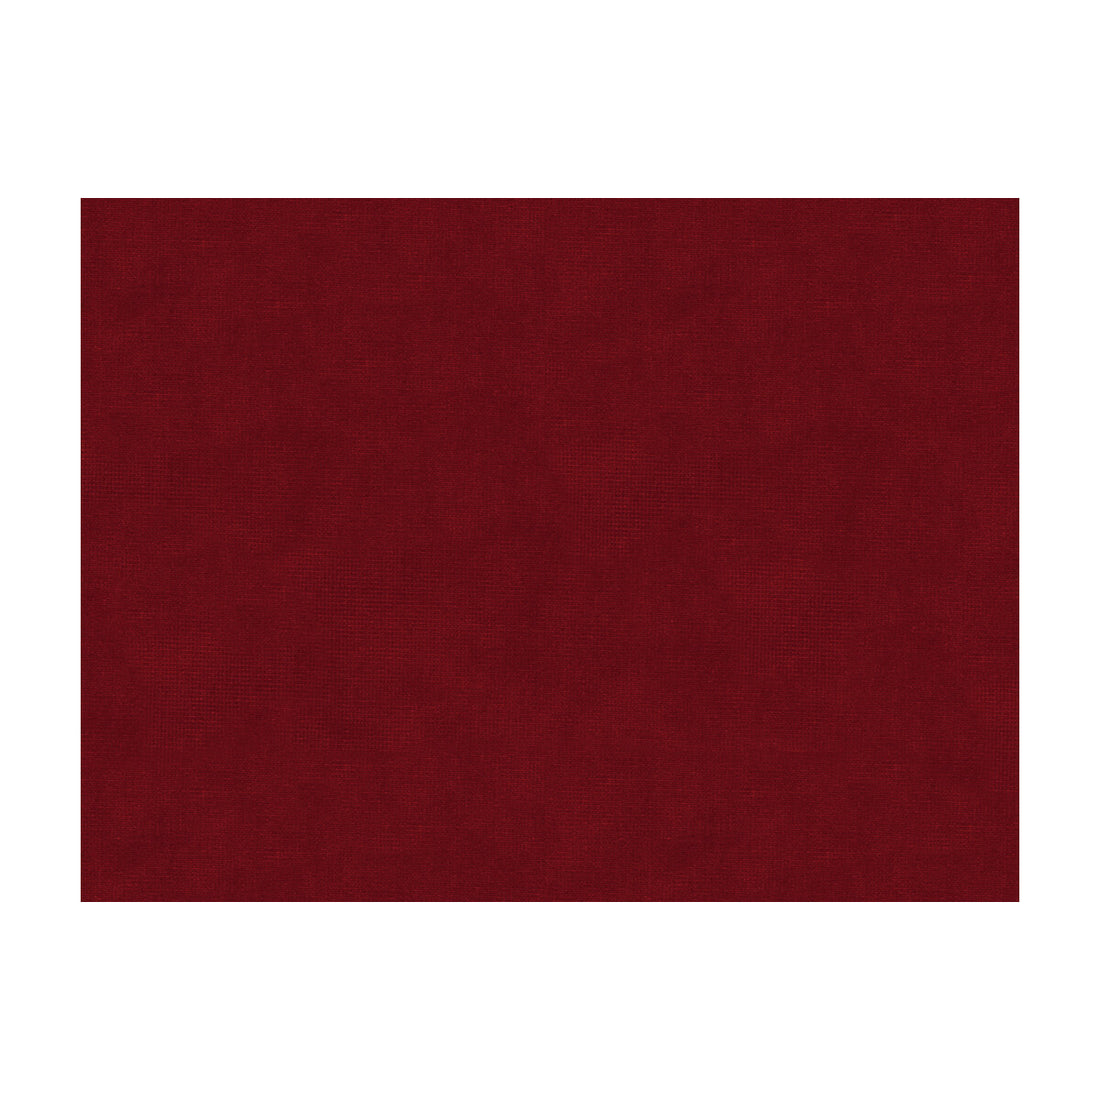 Charmant Velvet fabric in lacquer red color - pattern 8013150.919.0 - by Brunschwig &amp; Fils